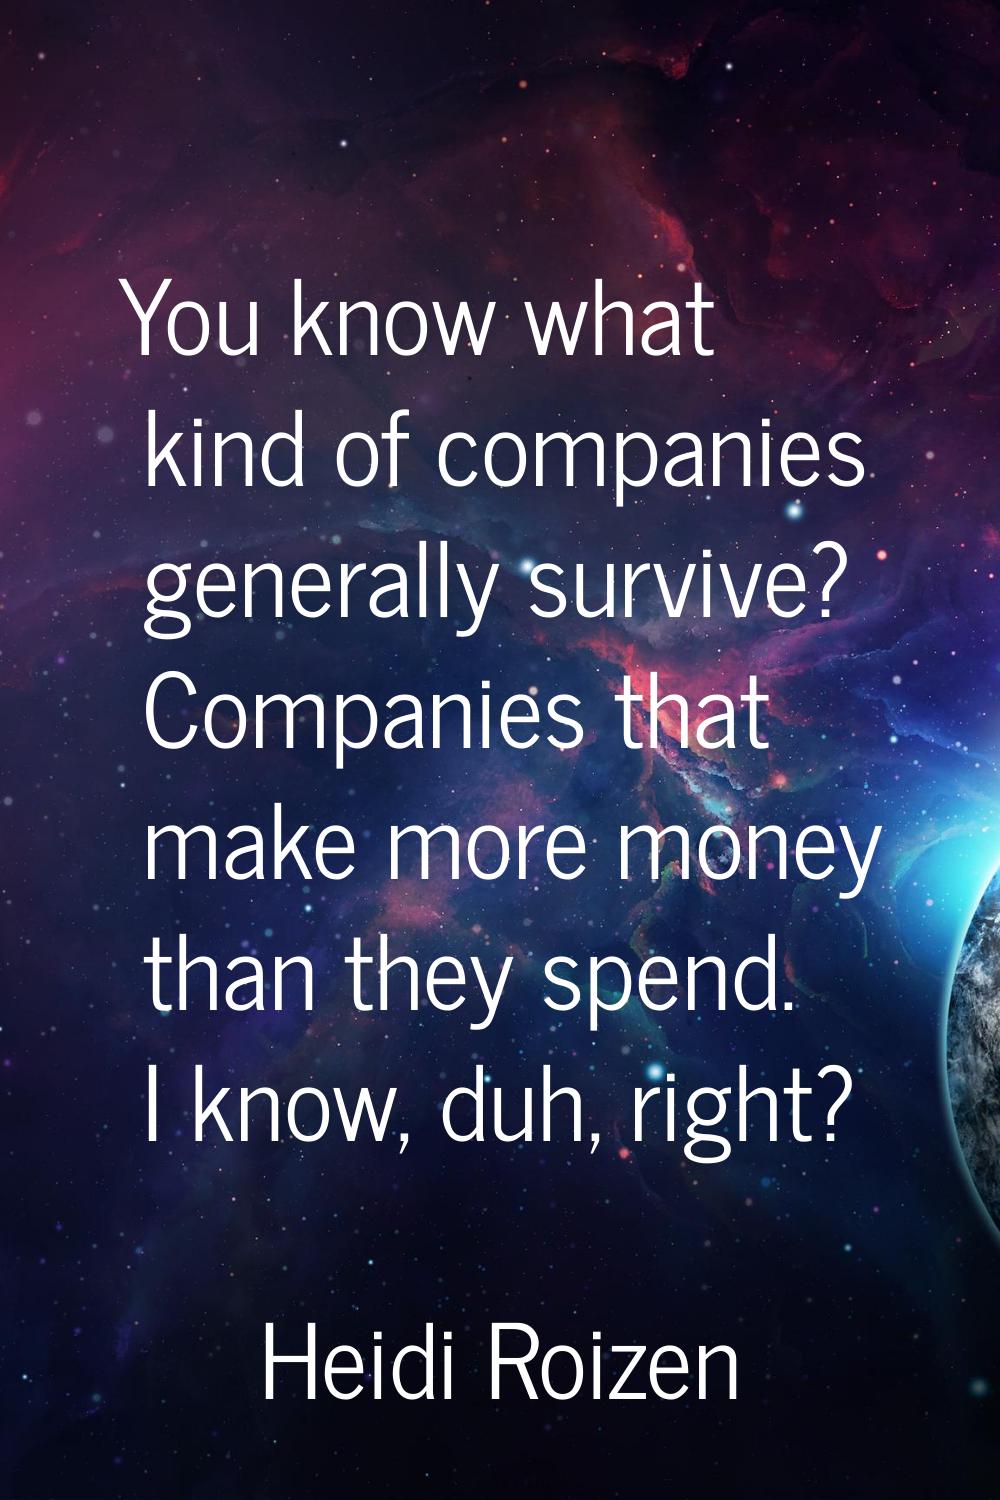 You know what kind of companies generally survive? Companies that make more money than they spend. 